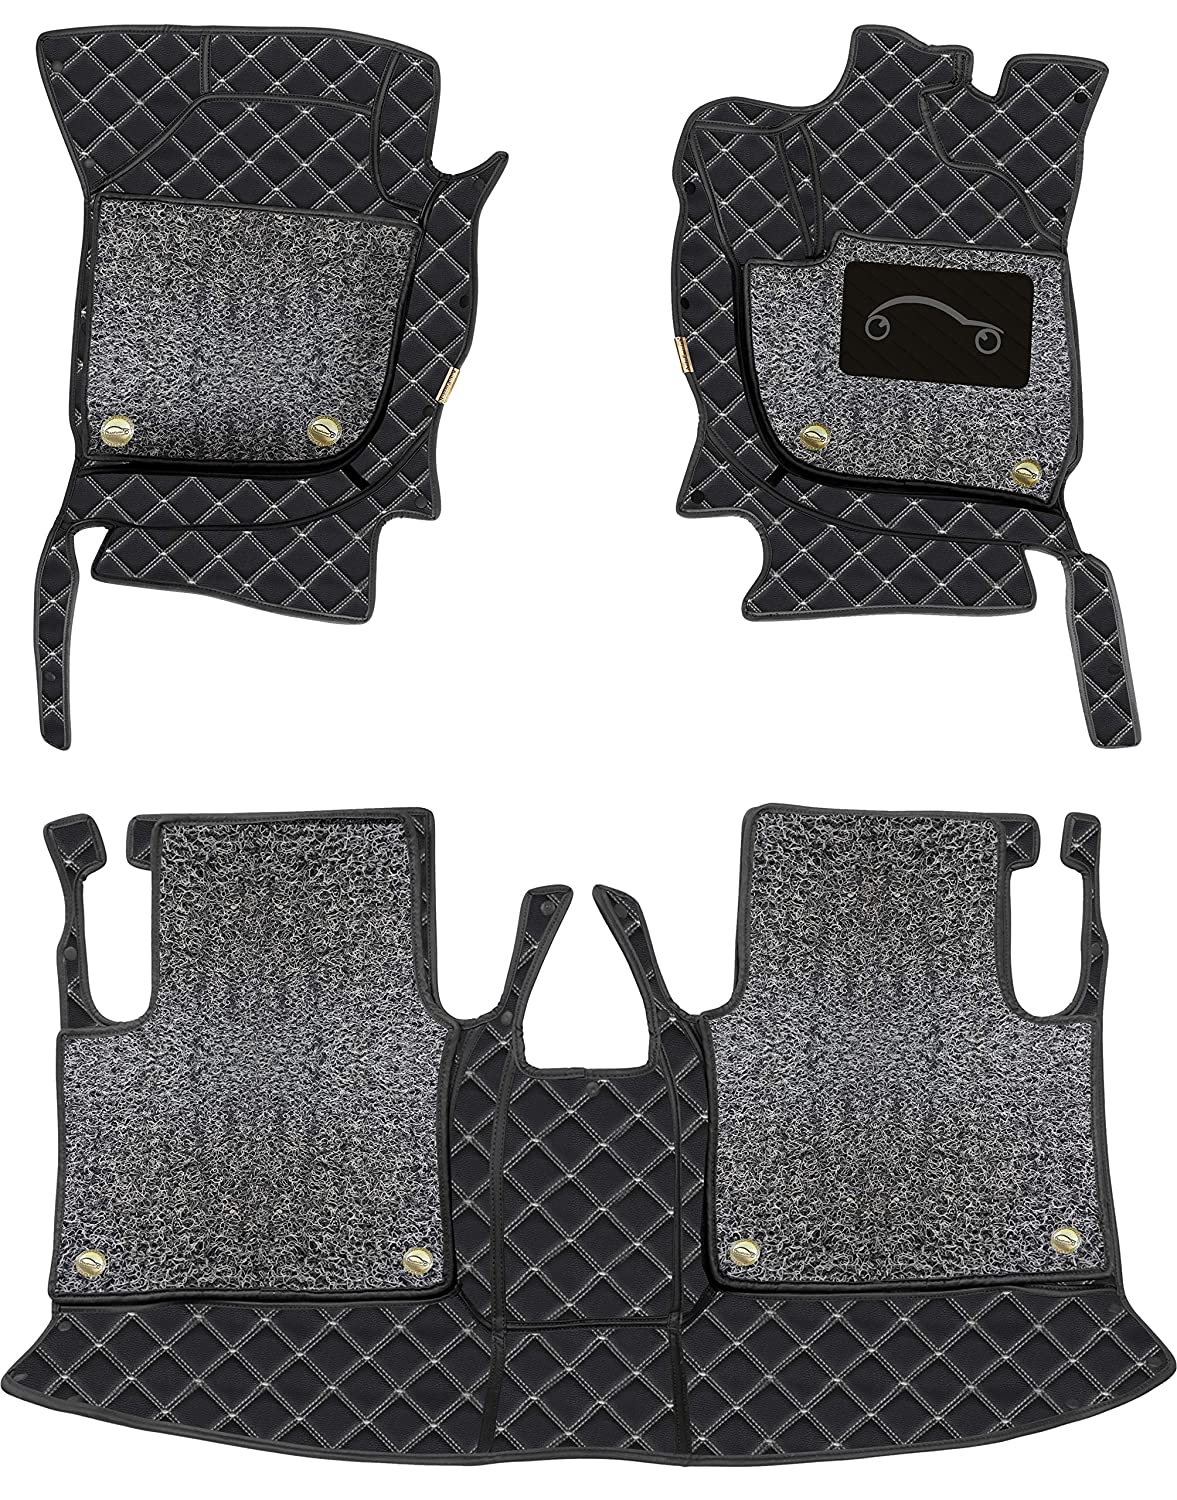 MG Hector Plus 2020 7D Luxury Car Mat, All Weather Proof, Anti-Skid, 100% Waterproof & Odorless with Unique Diamond Fish Design (24mm Luxury PU Leather, 2 Rows)